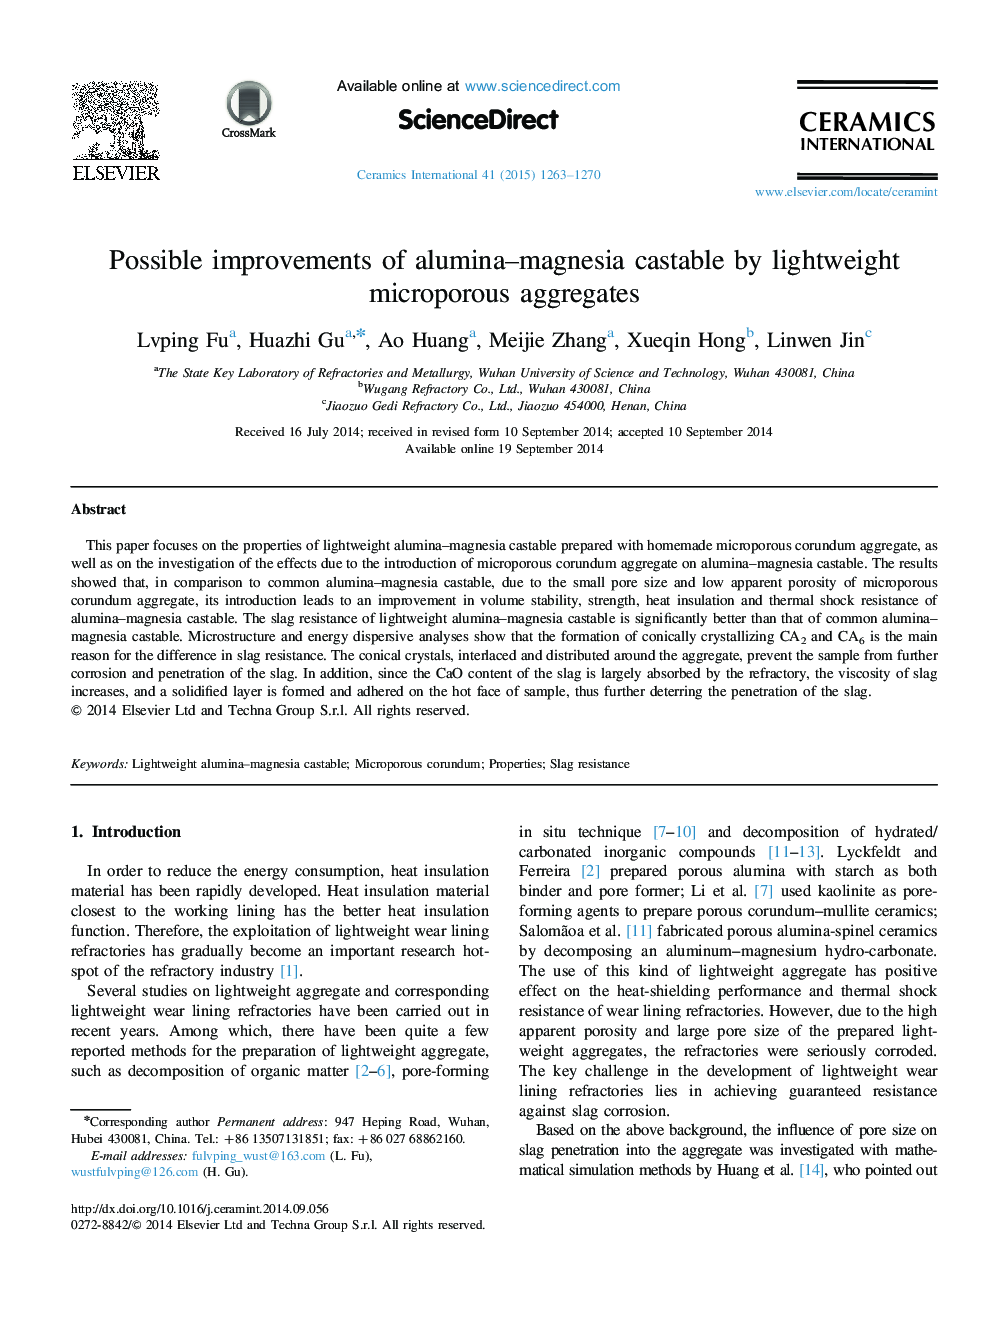 Possible improvements of alumina–magnesia castable by lightweight microporous aggregates